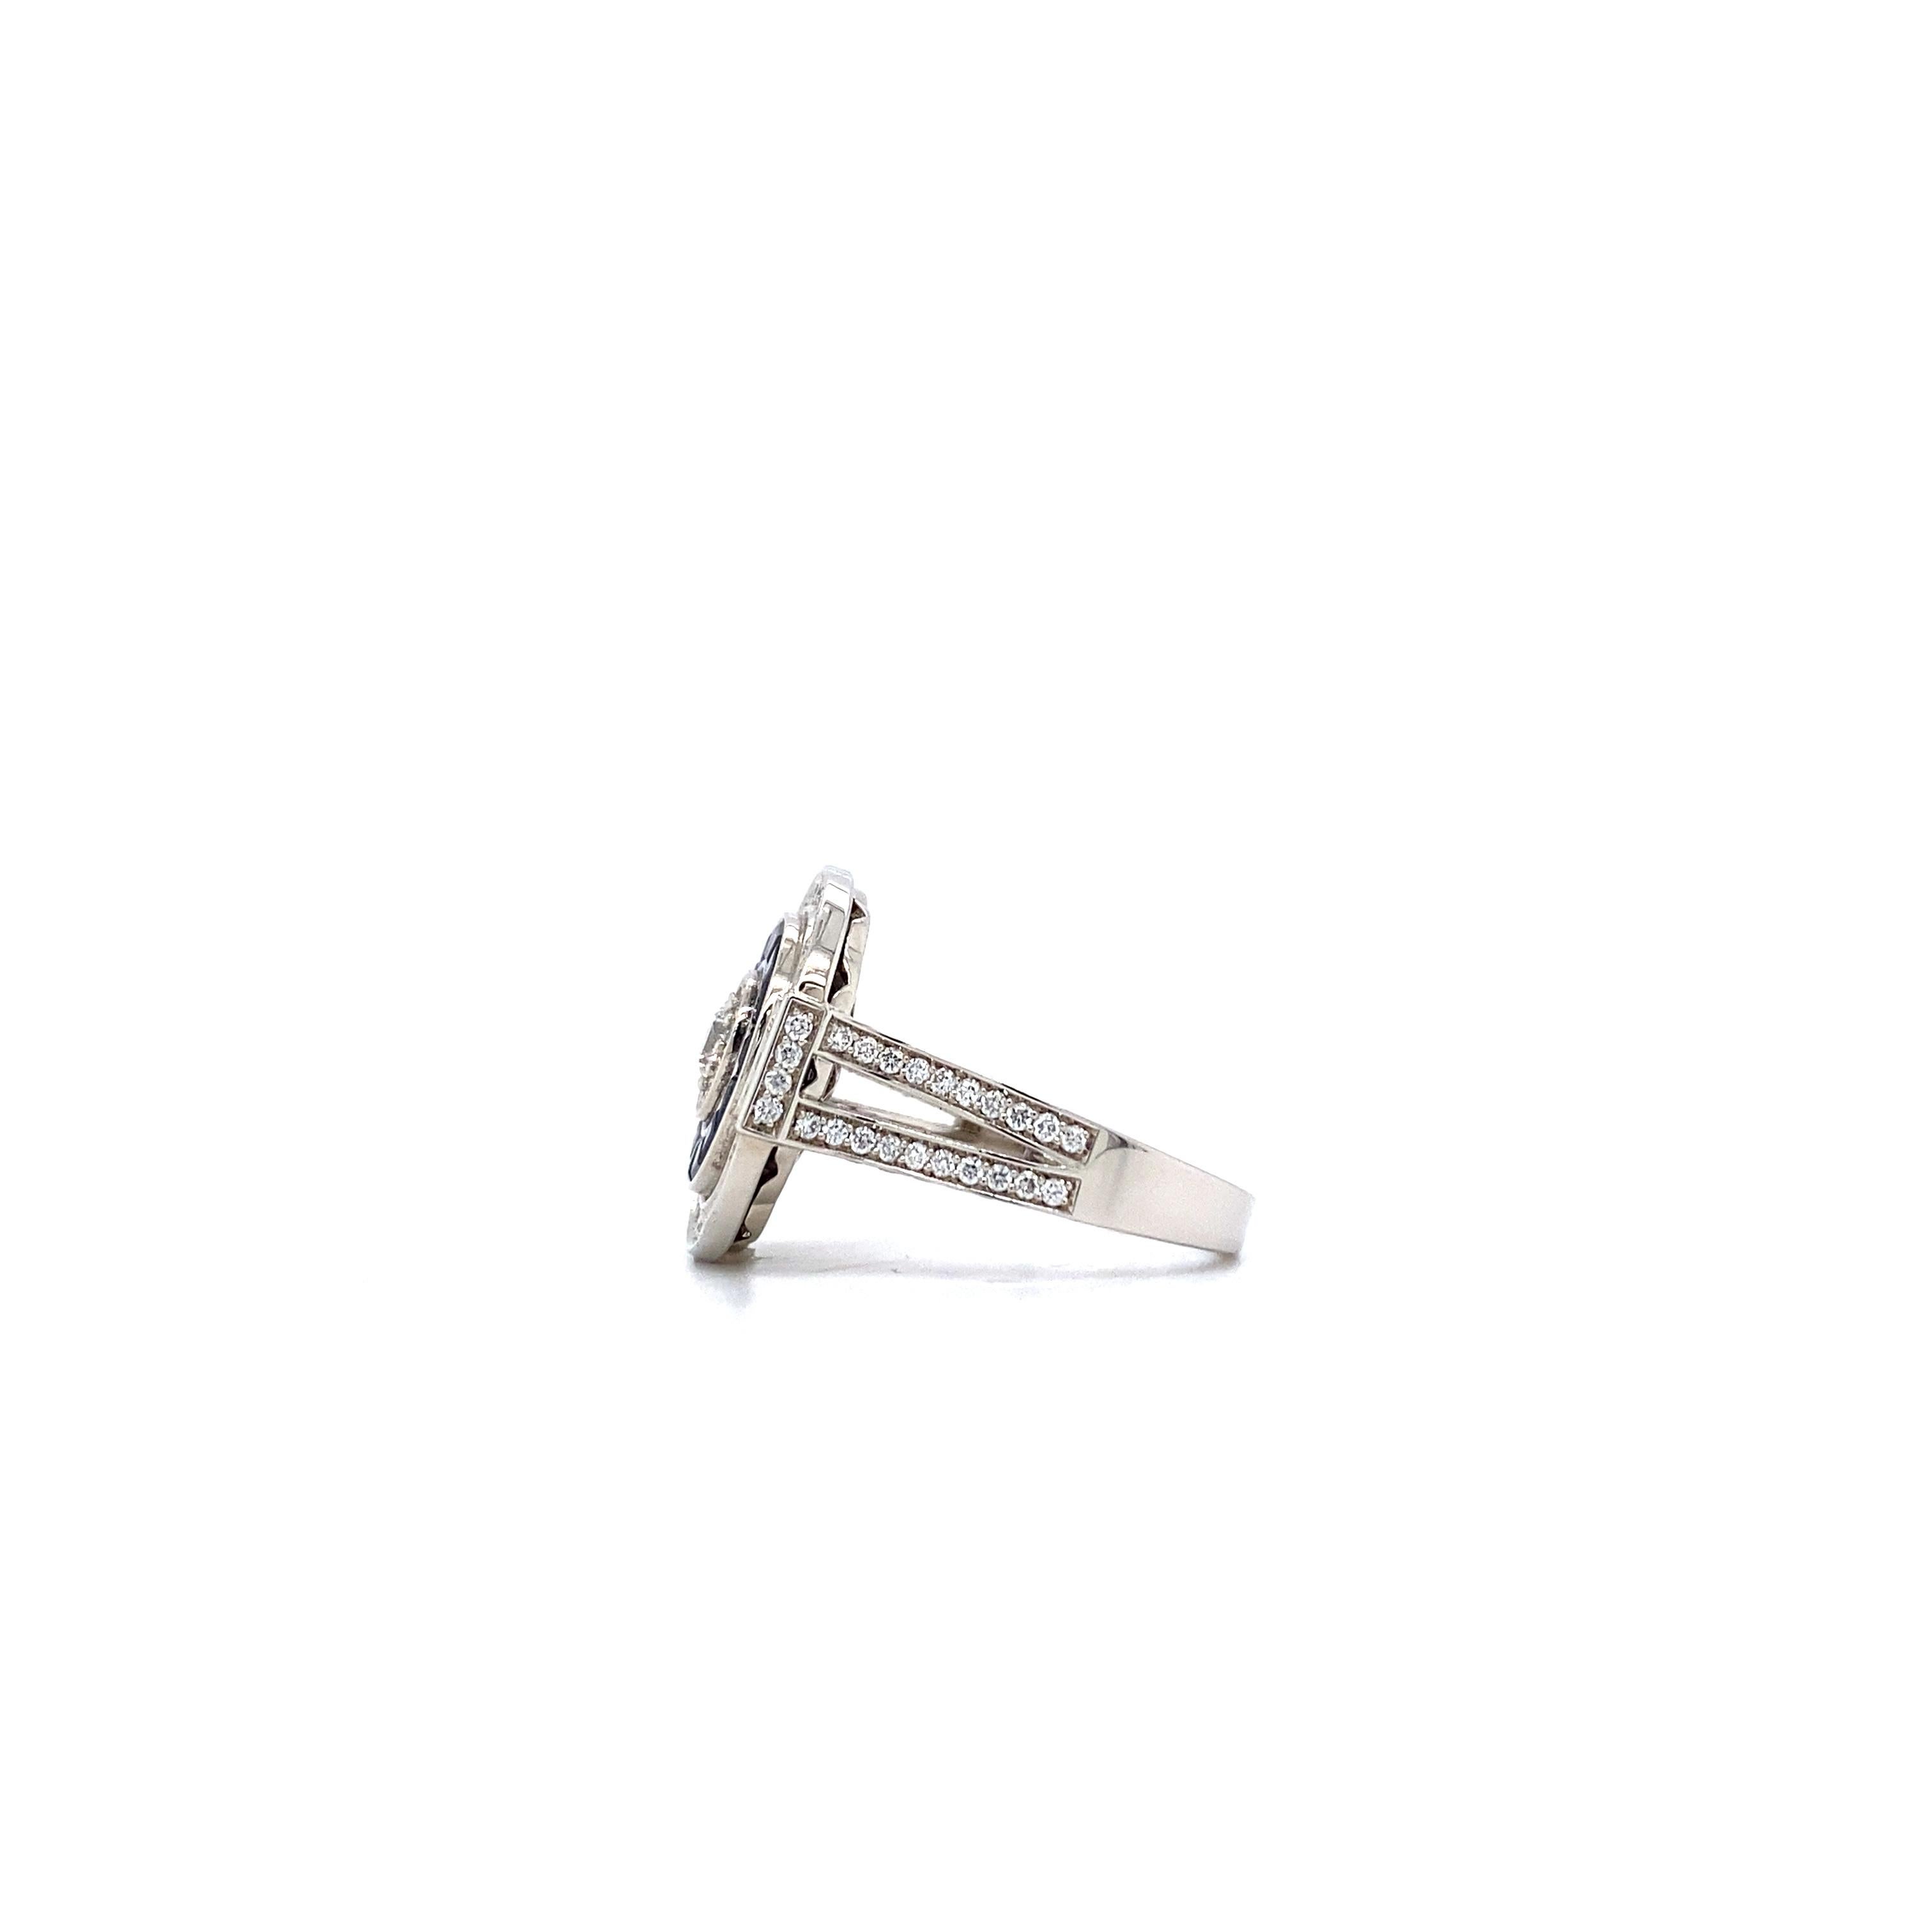 Victor Mayer Soiree Ring 18k White Gold Diamonds 1.13 ct Sapphire 0.97 ct For Sale 2